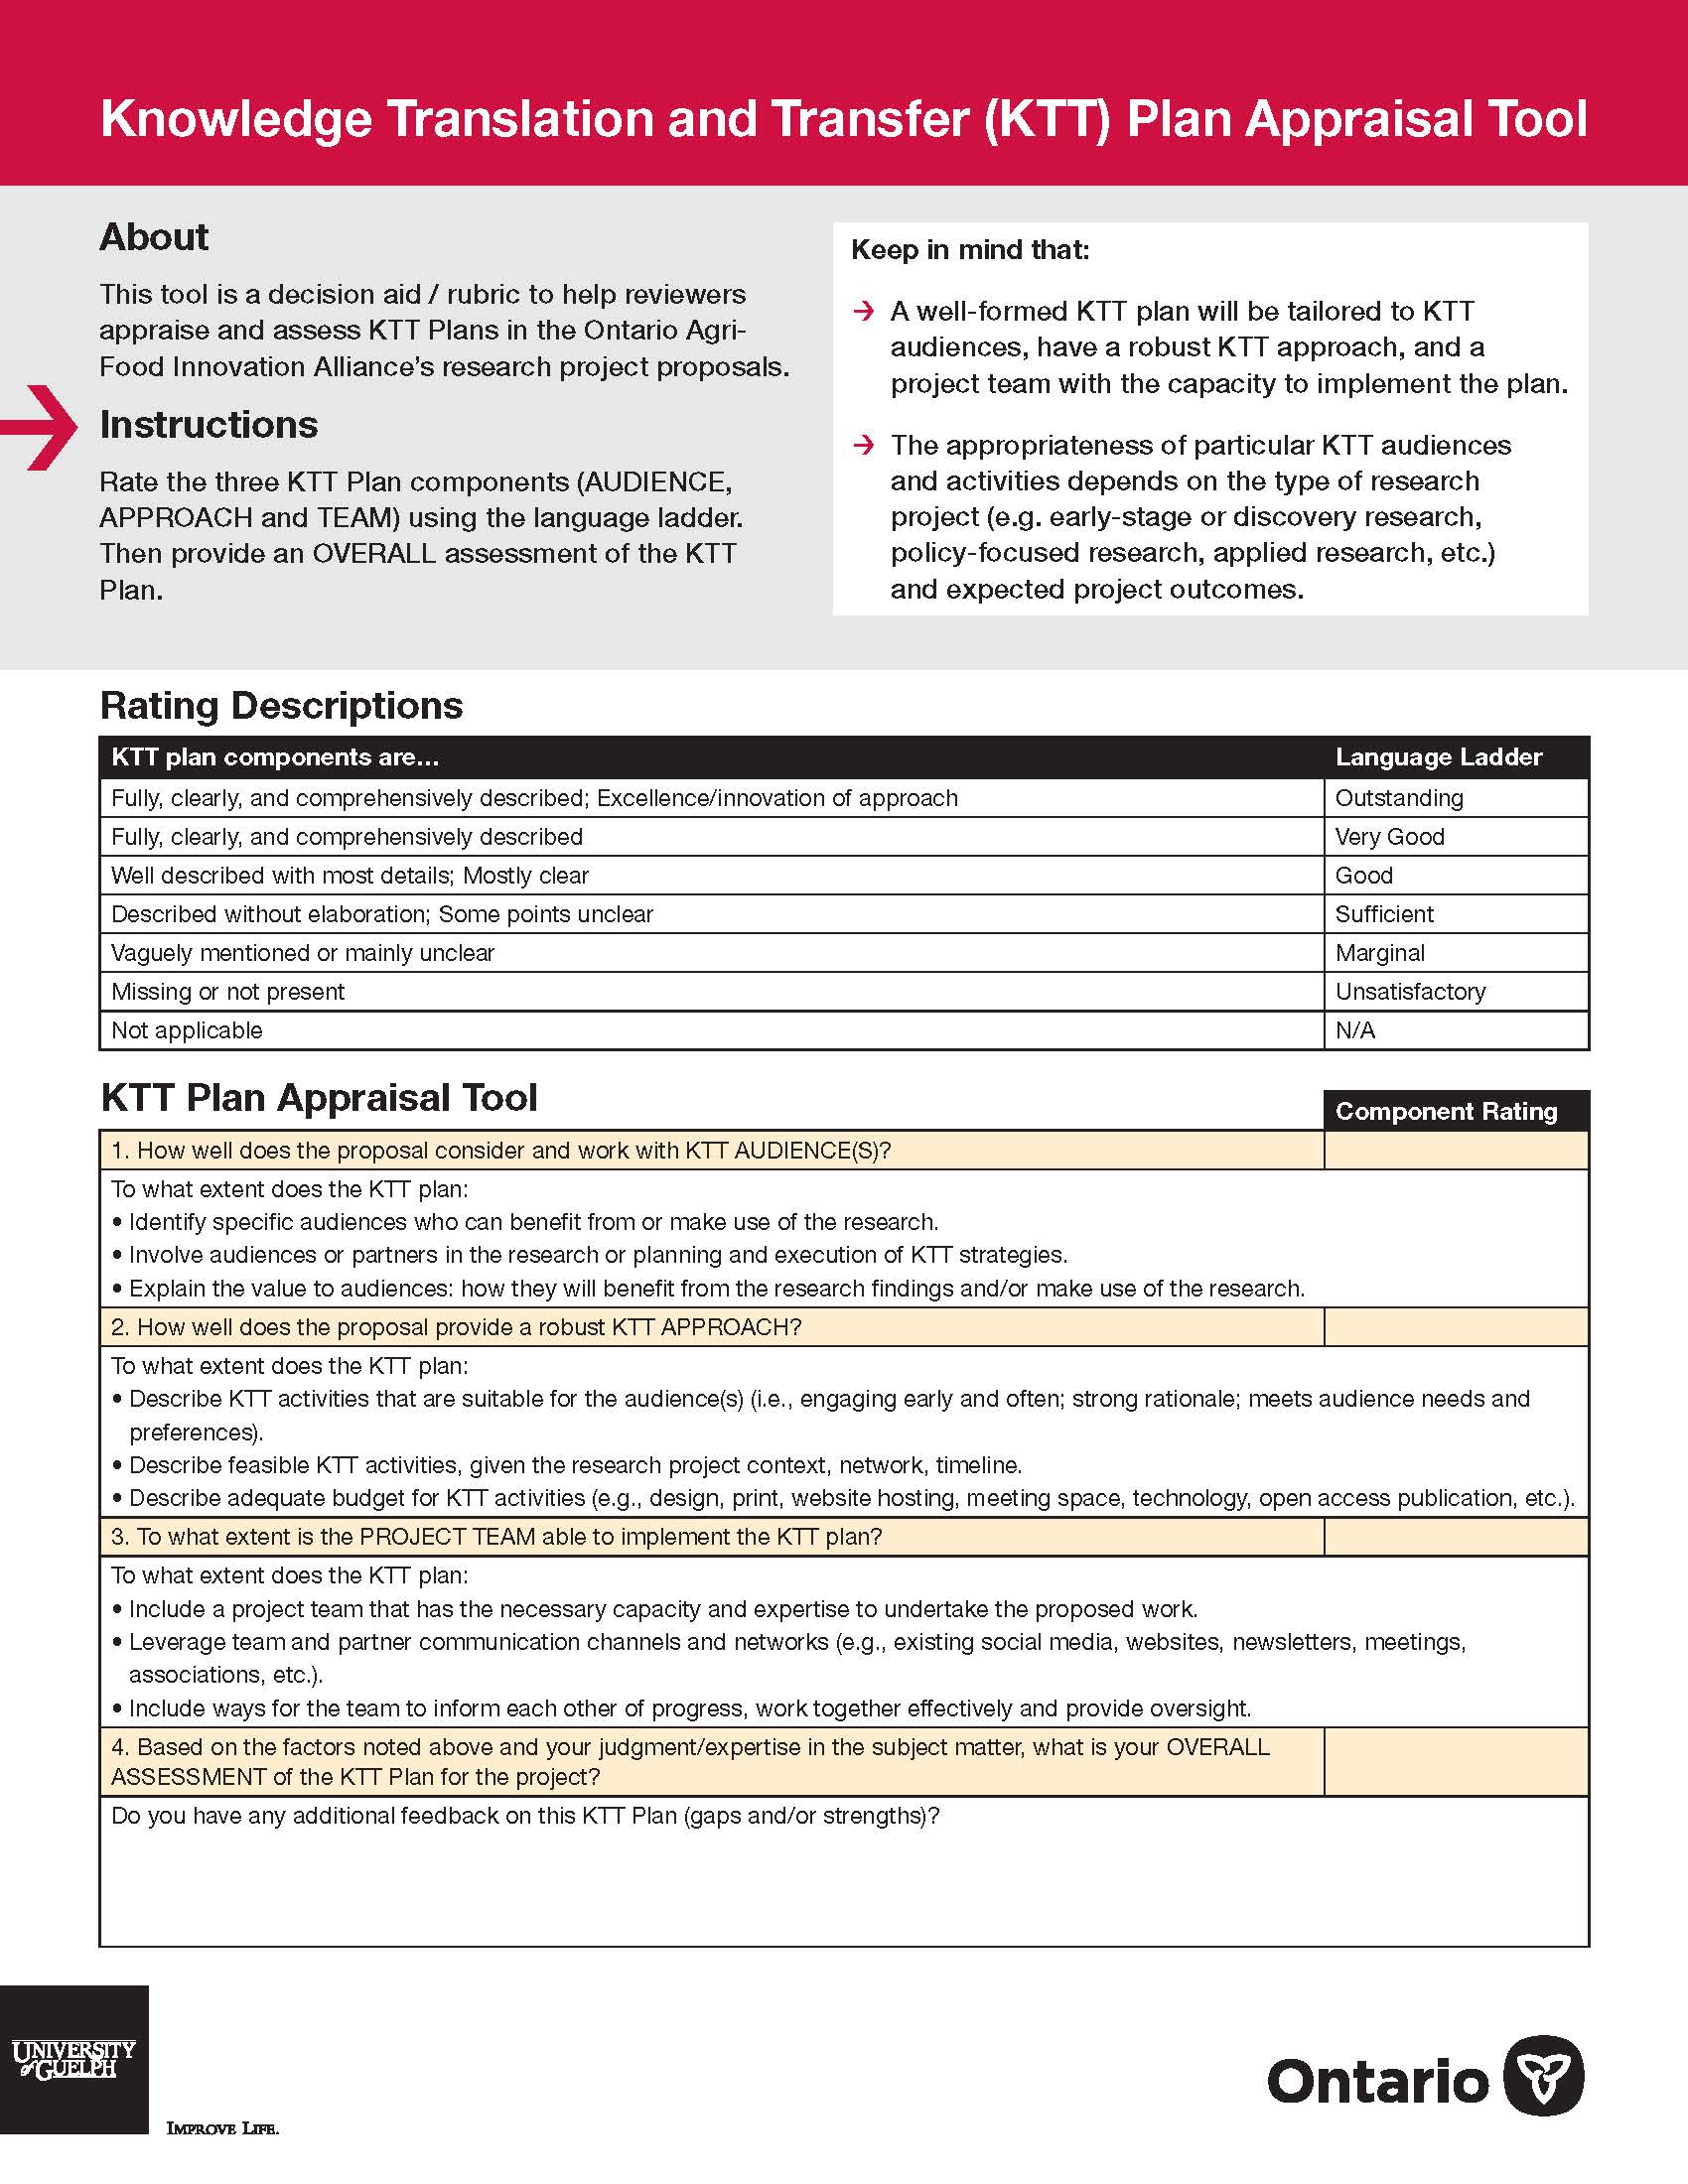 Front cover of the KTT Appraisal Tool document